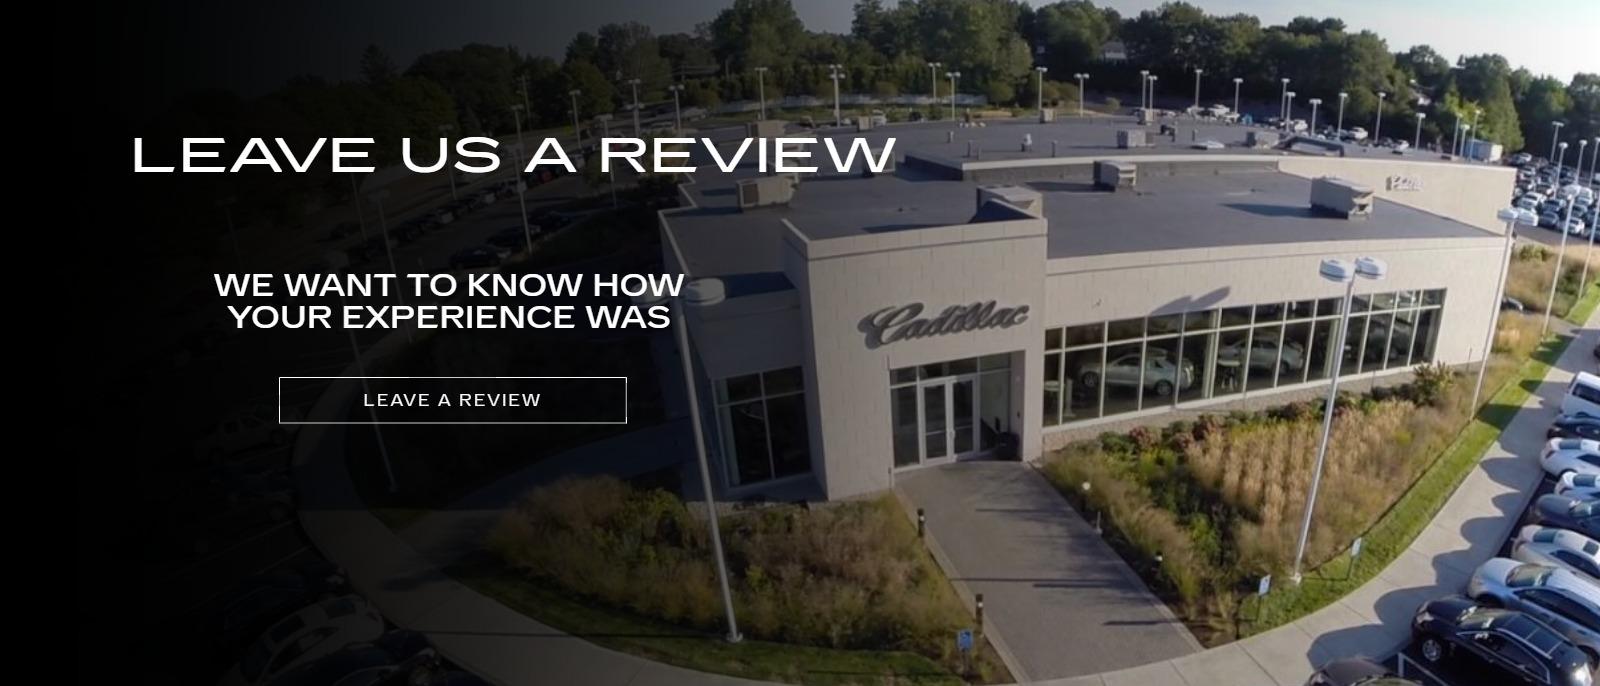 Leave a review of your experience at Cadillac of Norwood